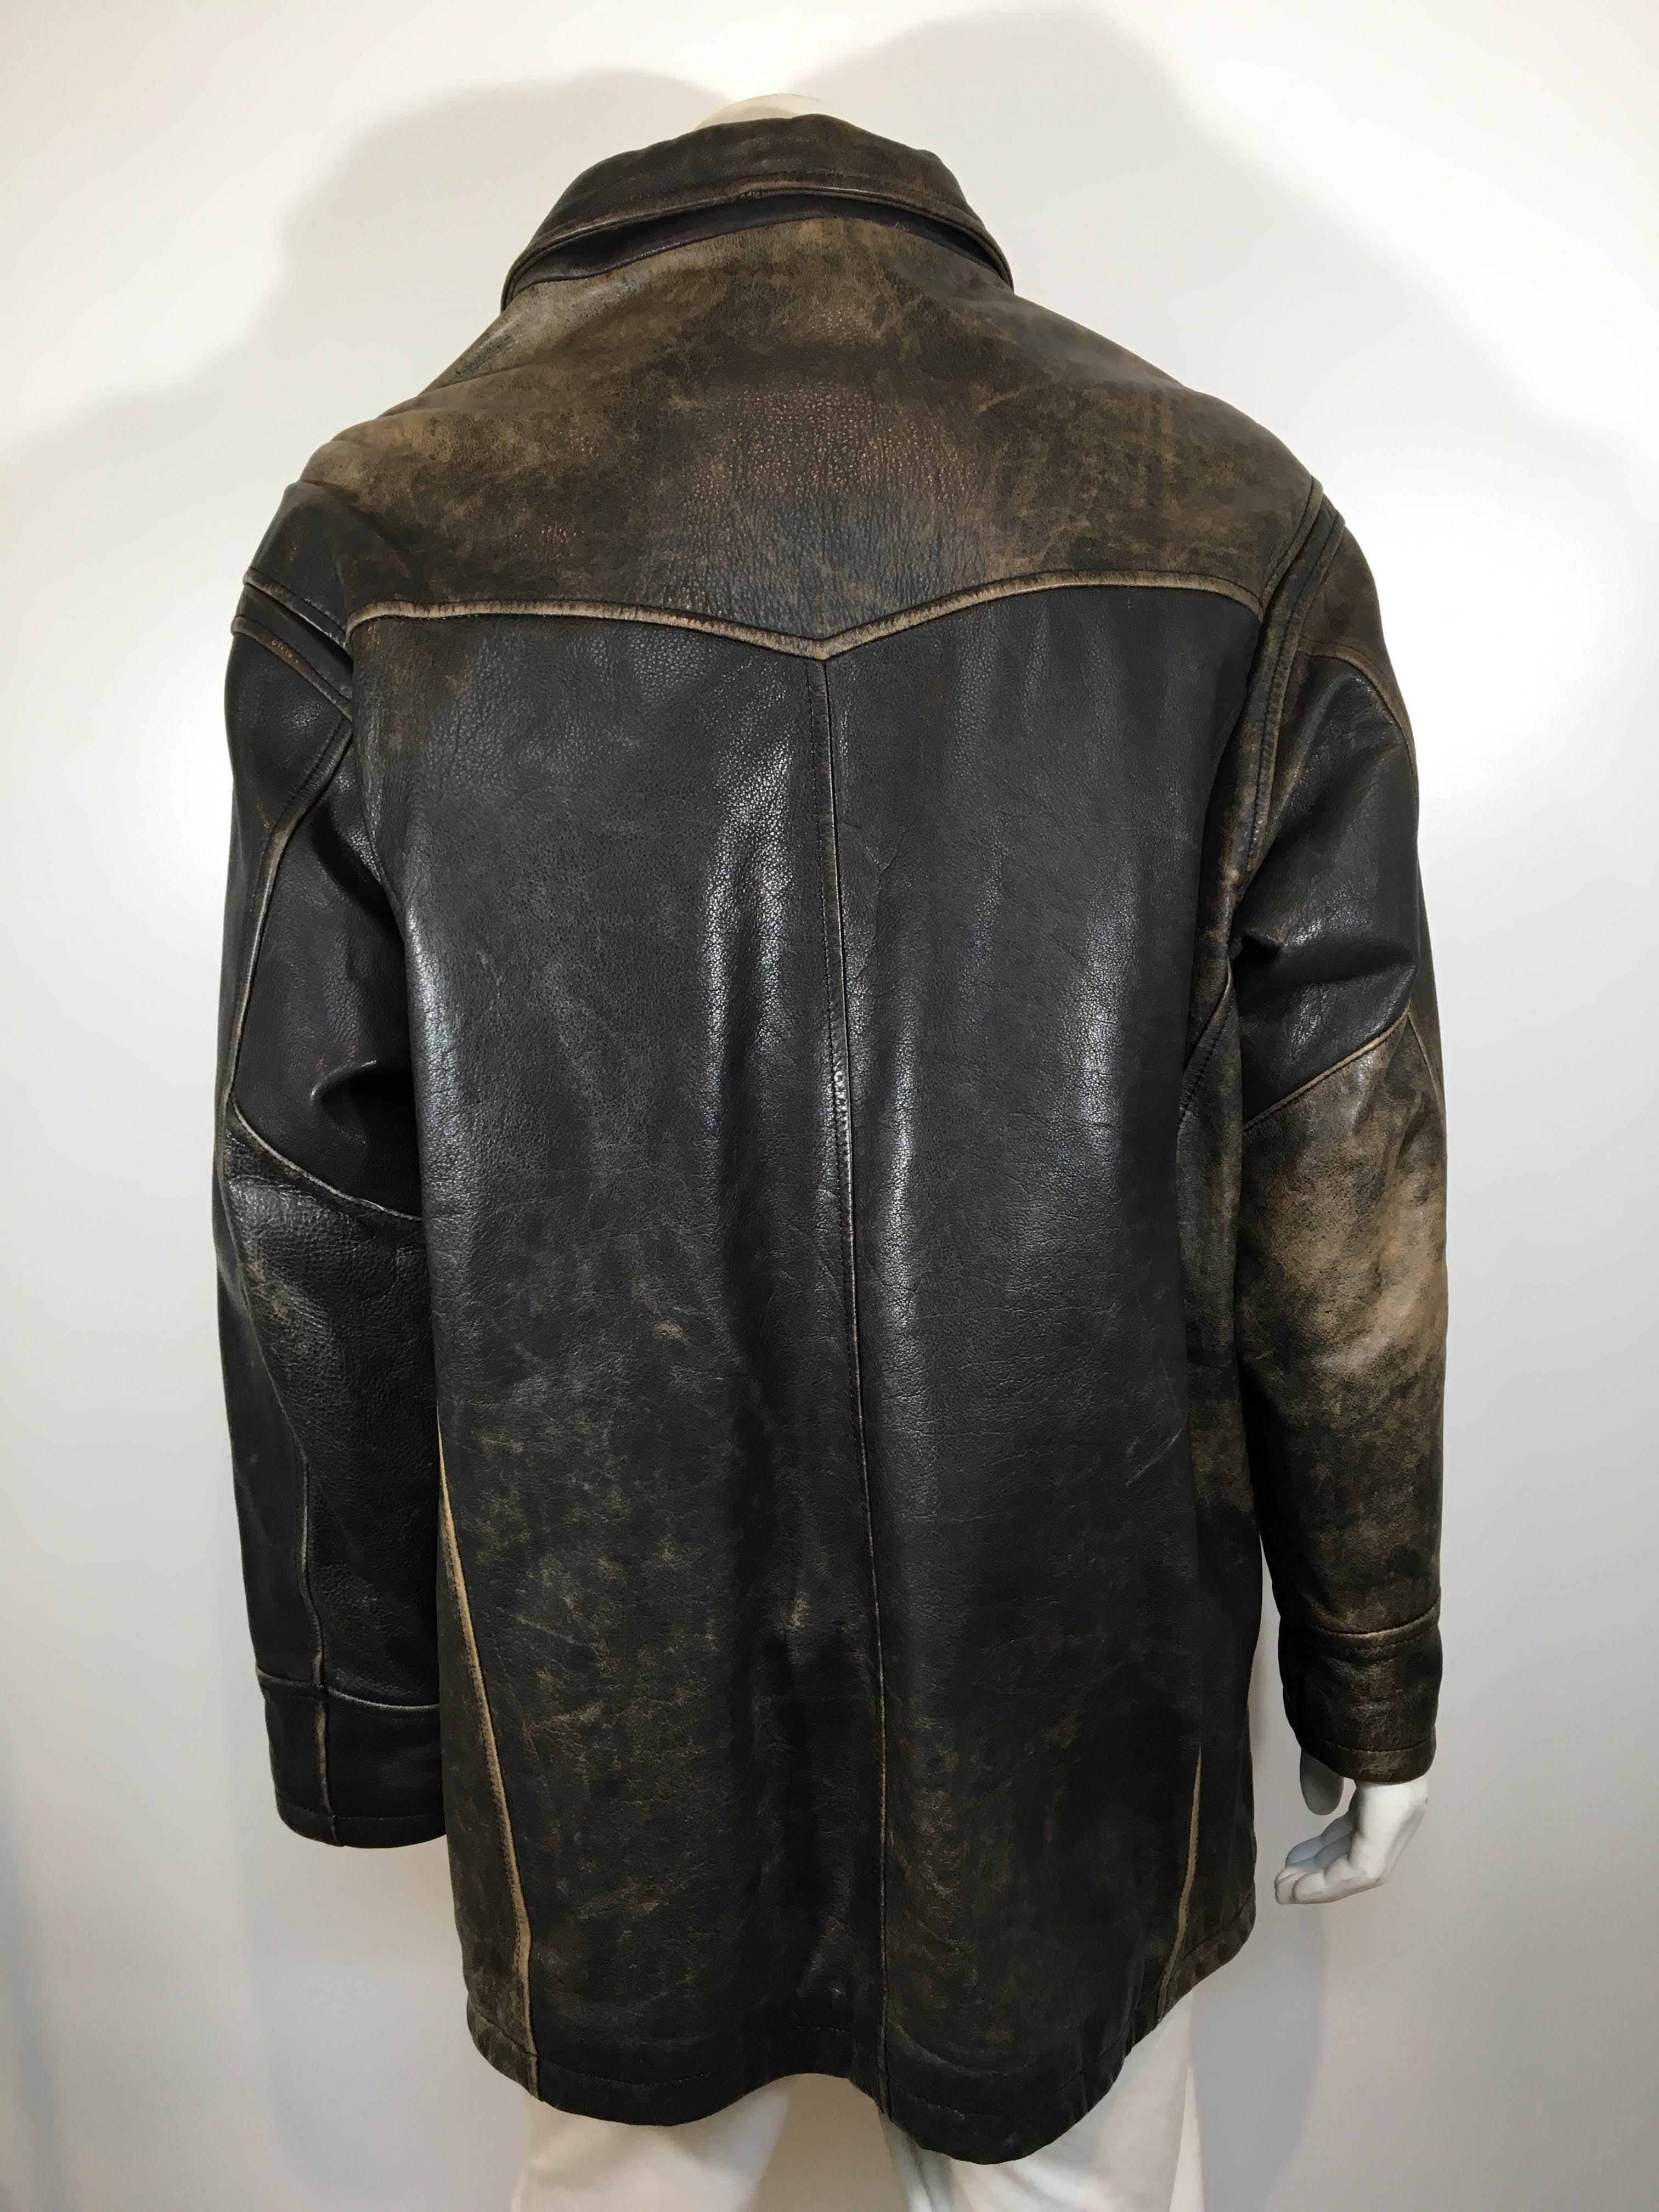 Black Men's Andrew Marc Faded Brown Leather jacket.